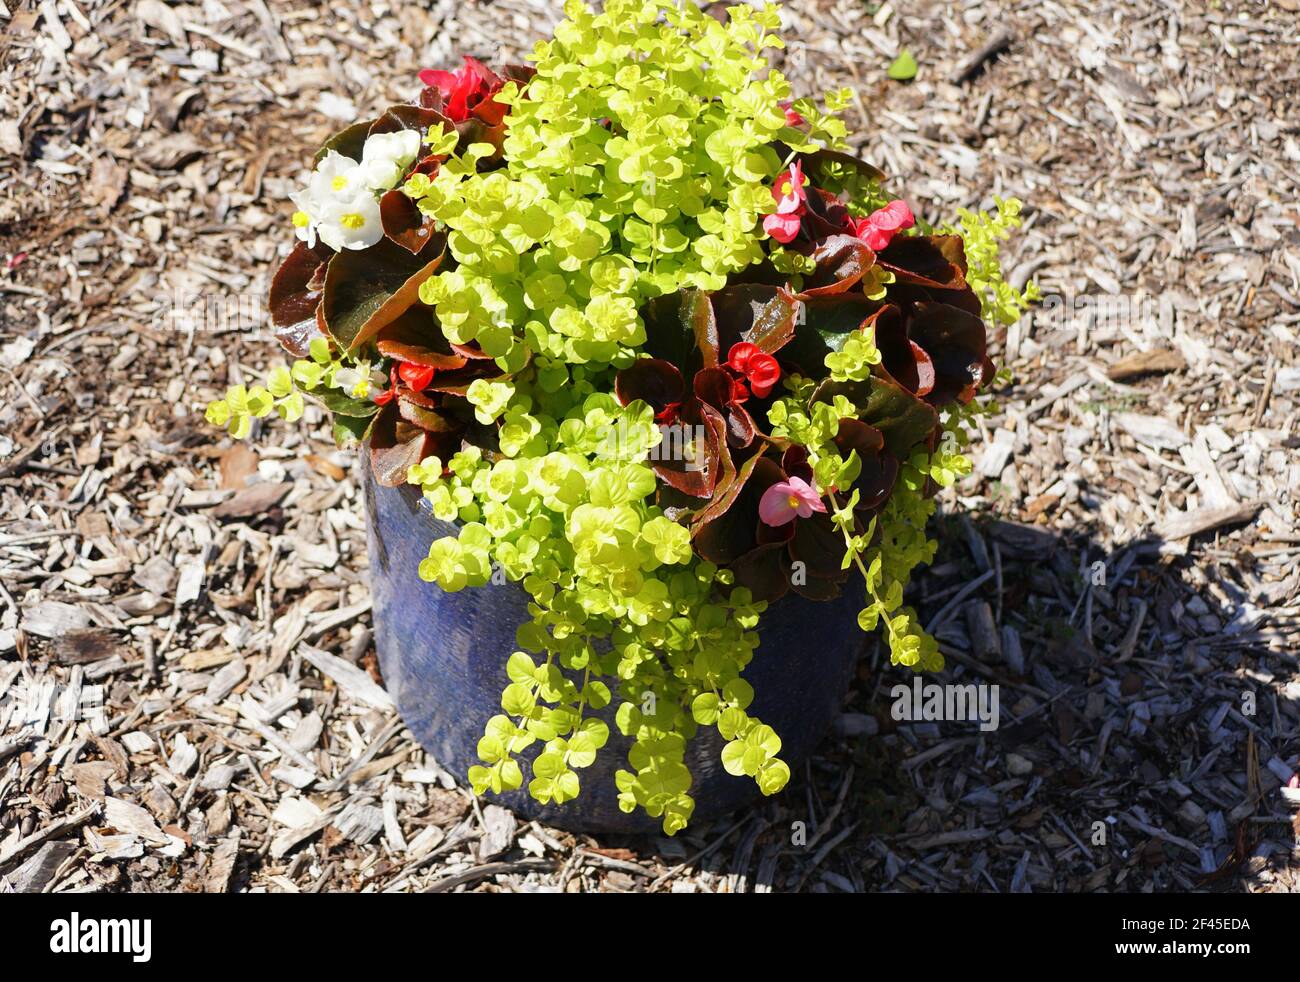 A small pot with green Creeping Jenny and red begonia plant Stock Photo